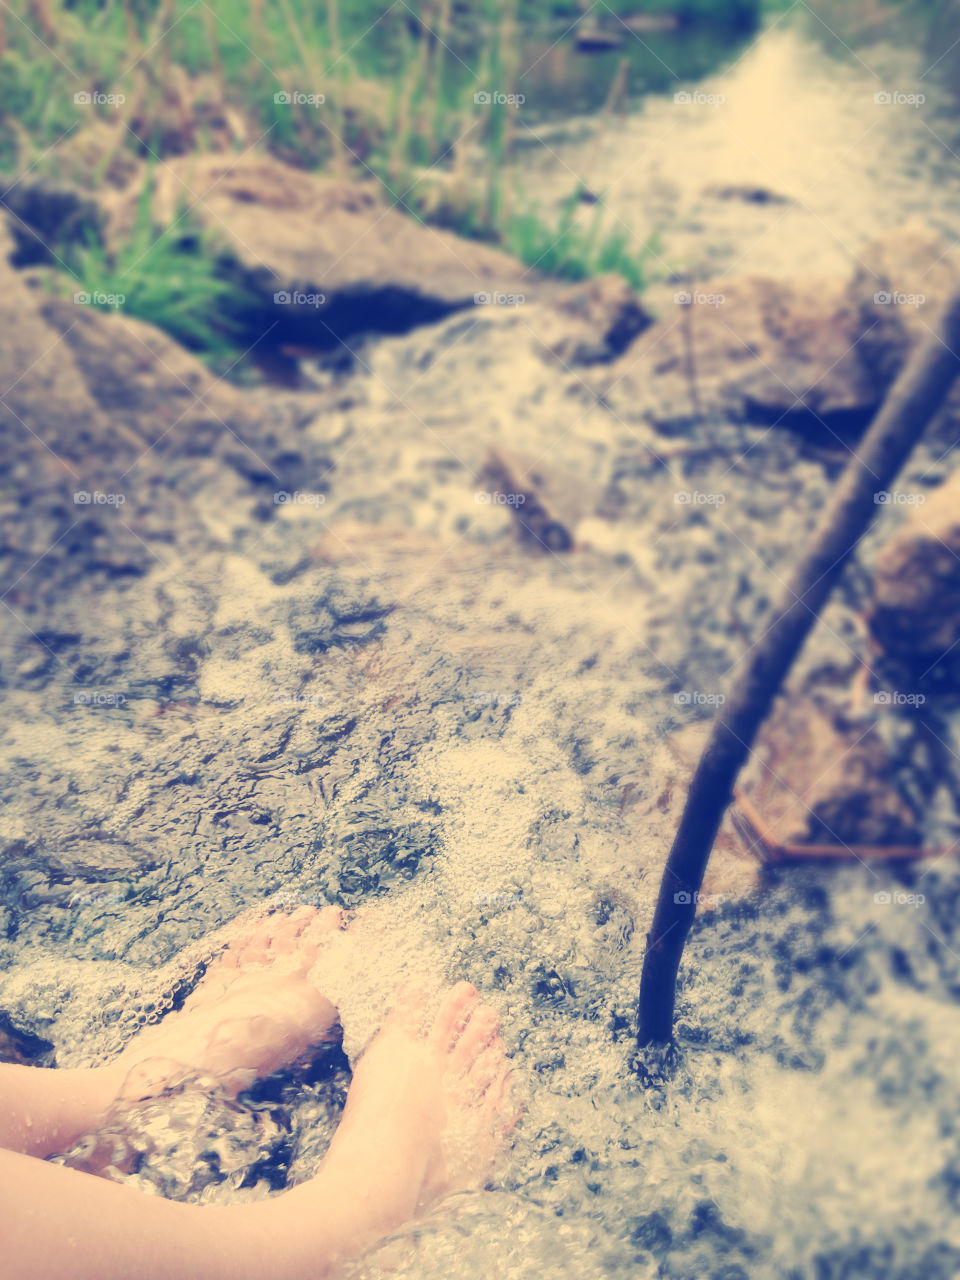 Creek feet. Me and my friends hand out at the creek by the river and we all stuck our toes in and I took a picture 